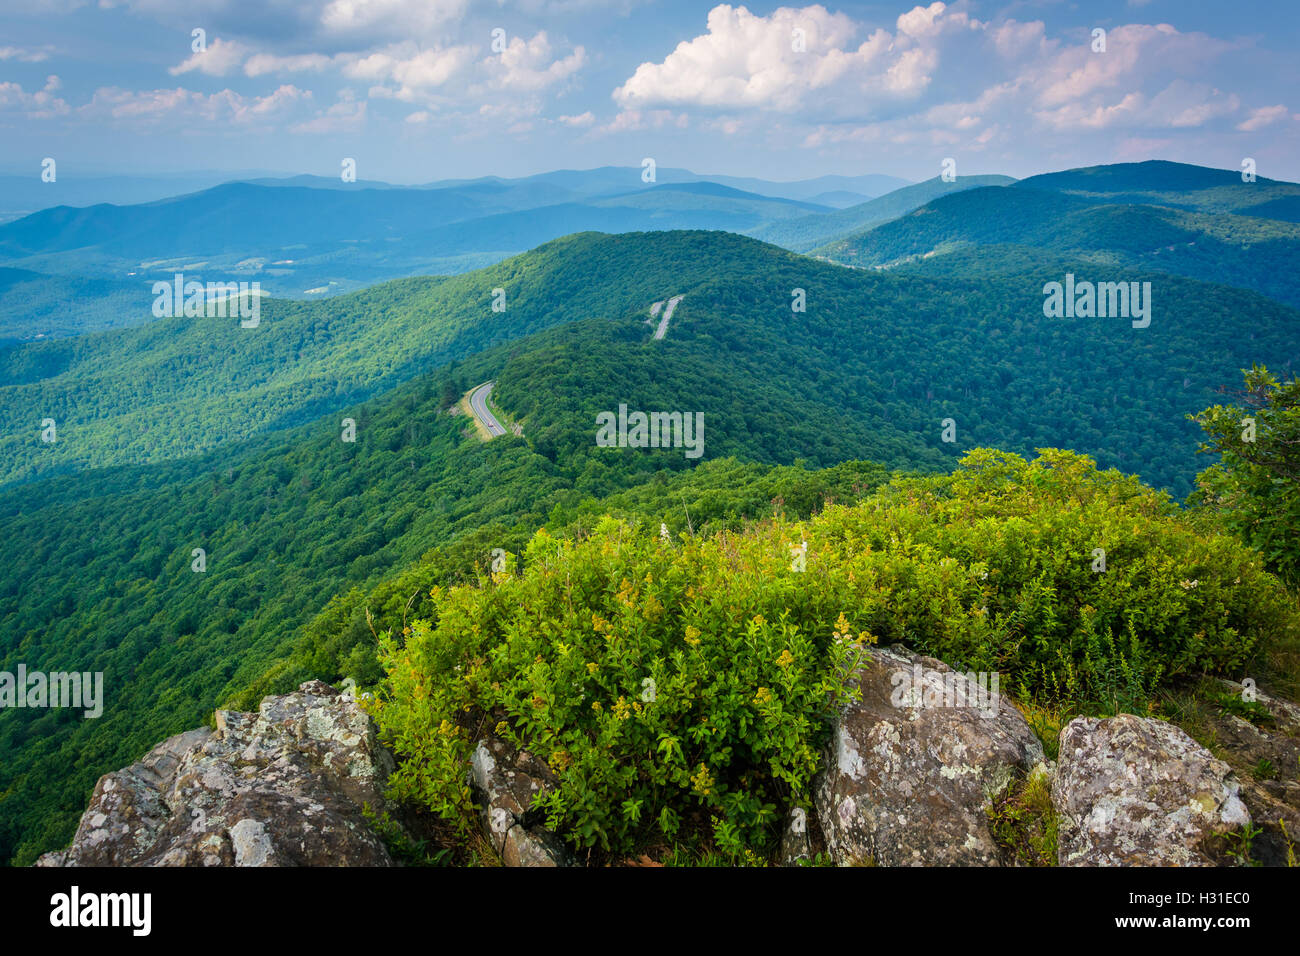 View of the Blue Ridge Mountains and Skyline Drive from Little Stony Man Cliffs, in Shenandoah National Park, Virginia. Stock Photo